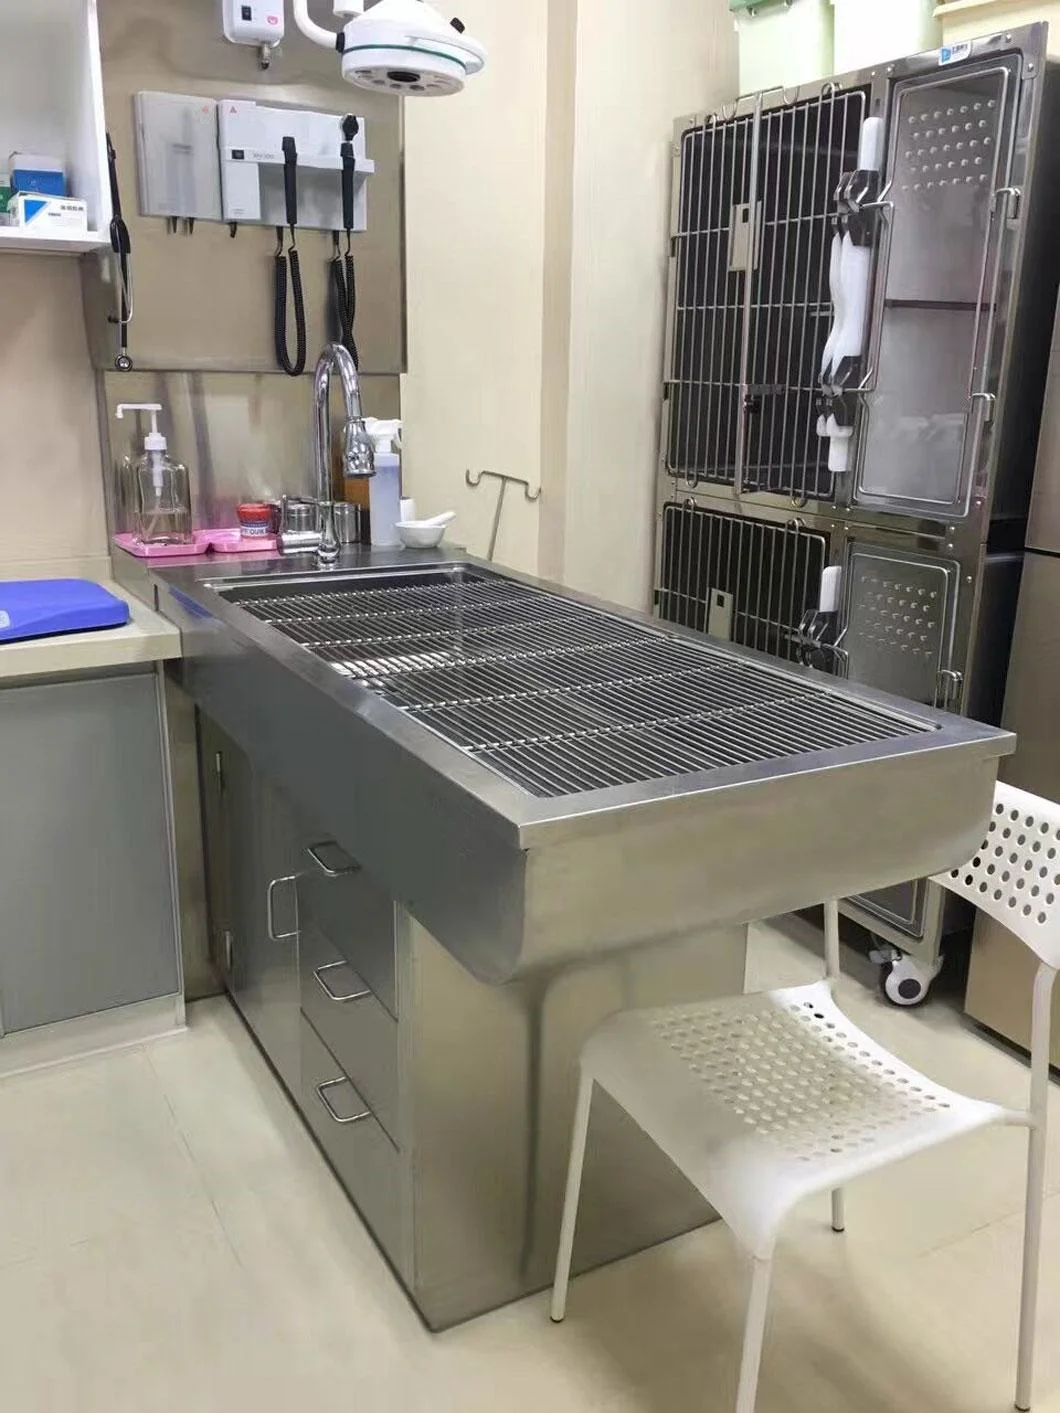 Stainless Steel Pet Vet Examination Disposal Table Dog Cat Treatment Grooming Table